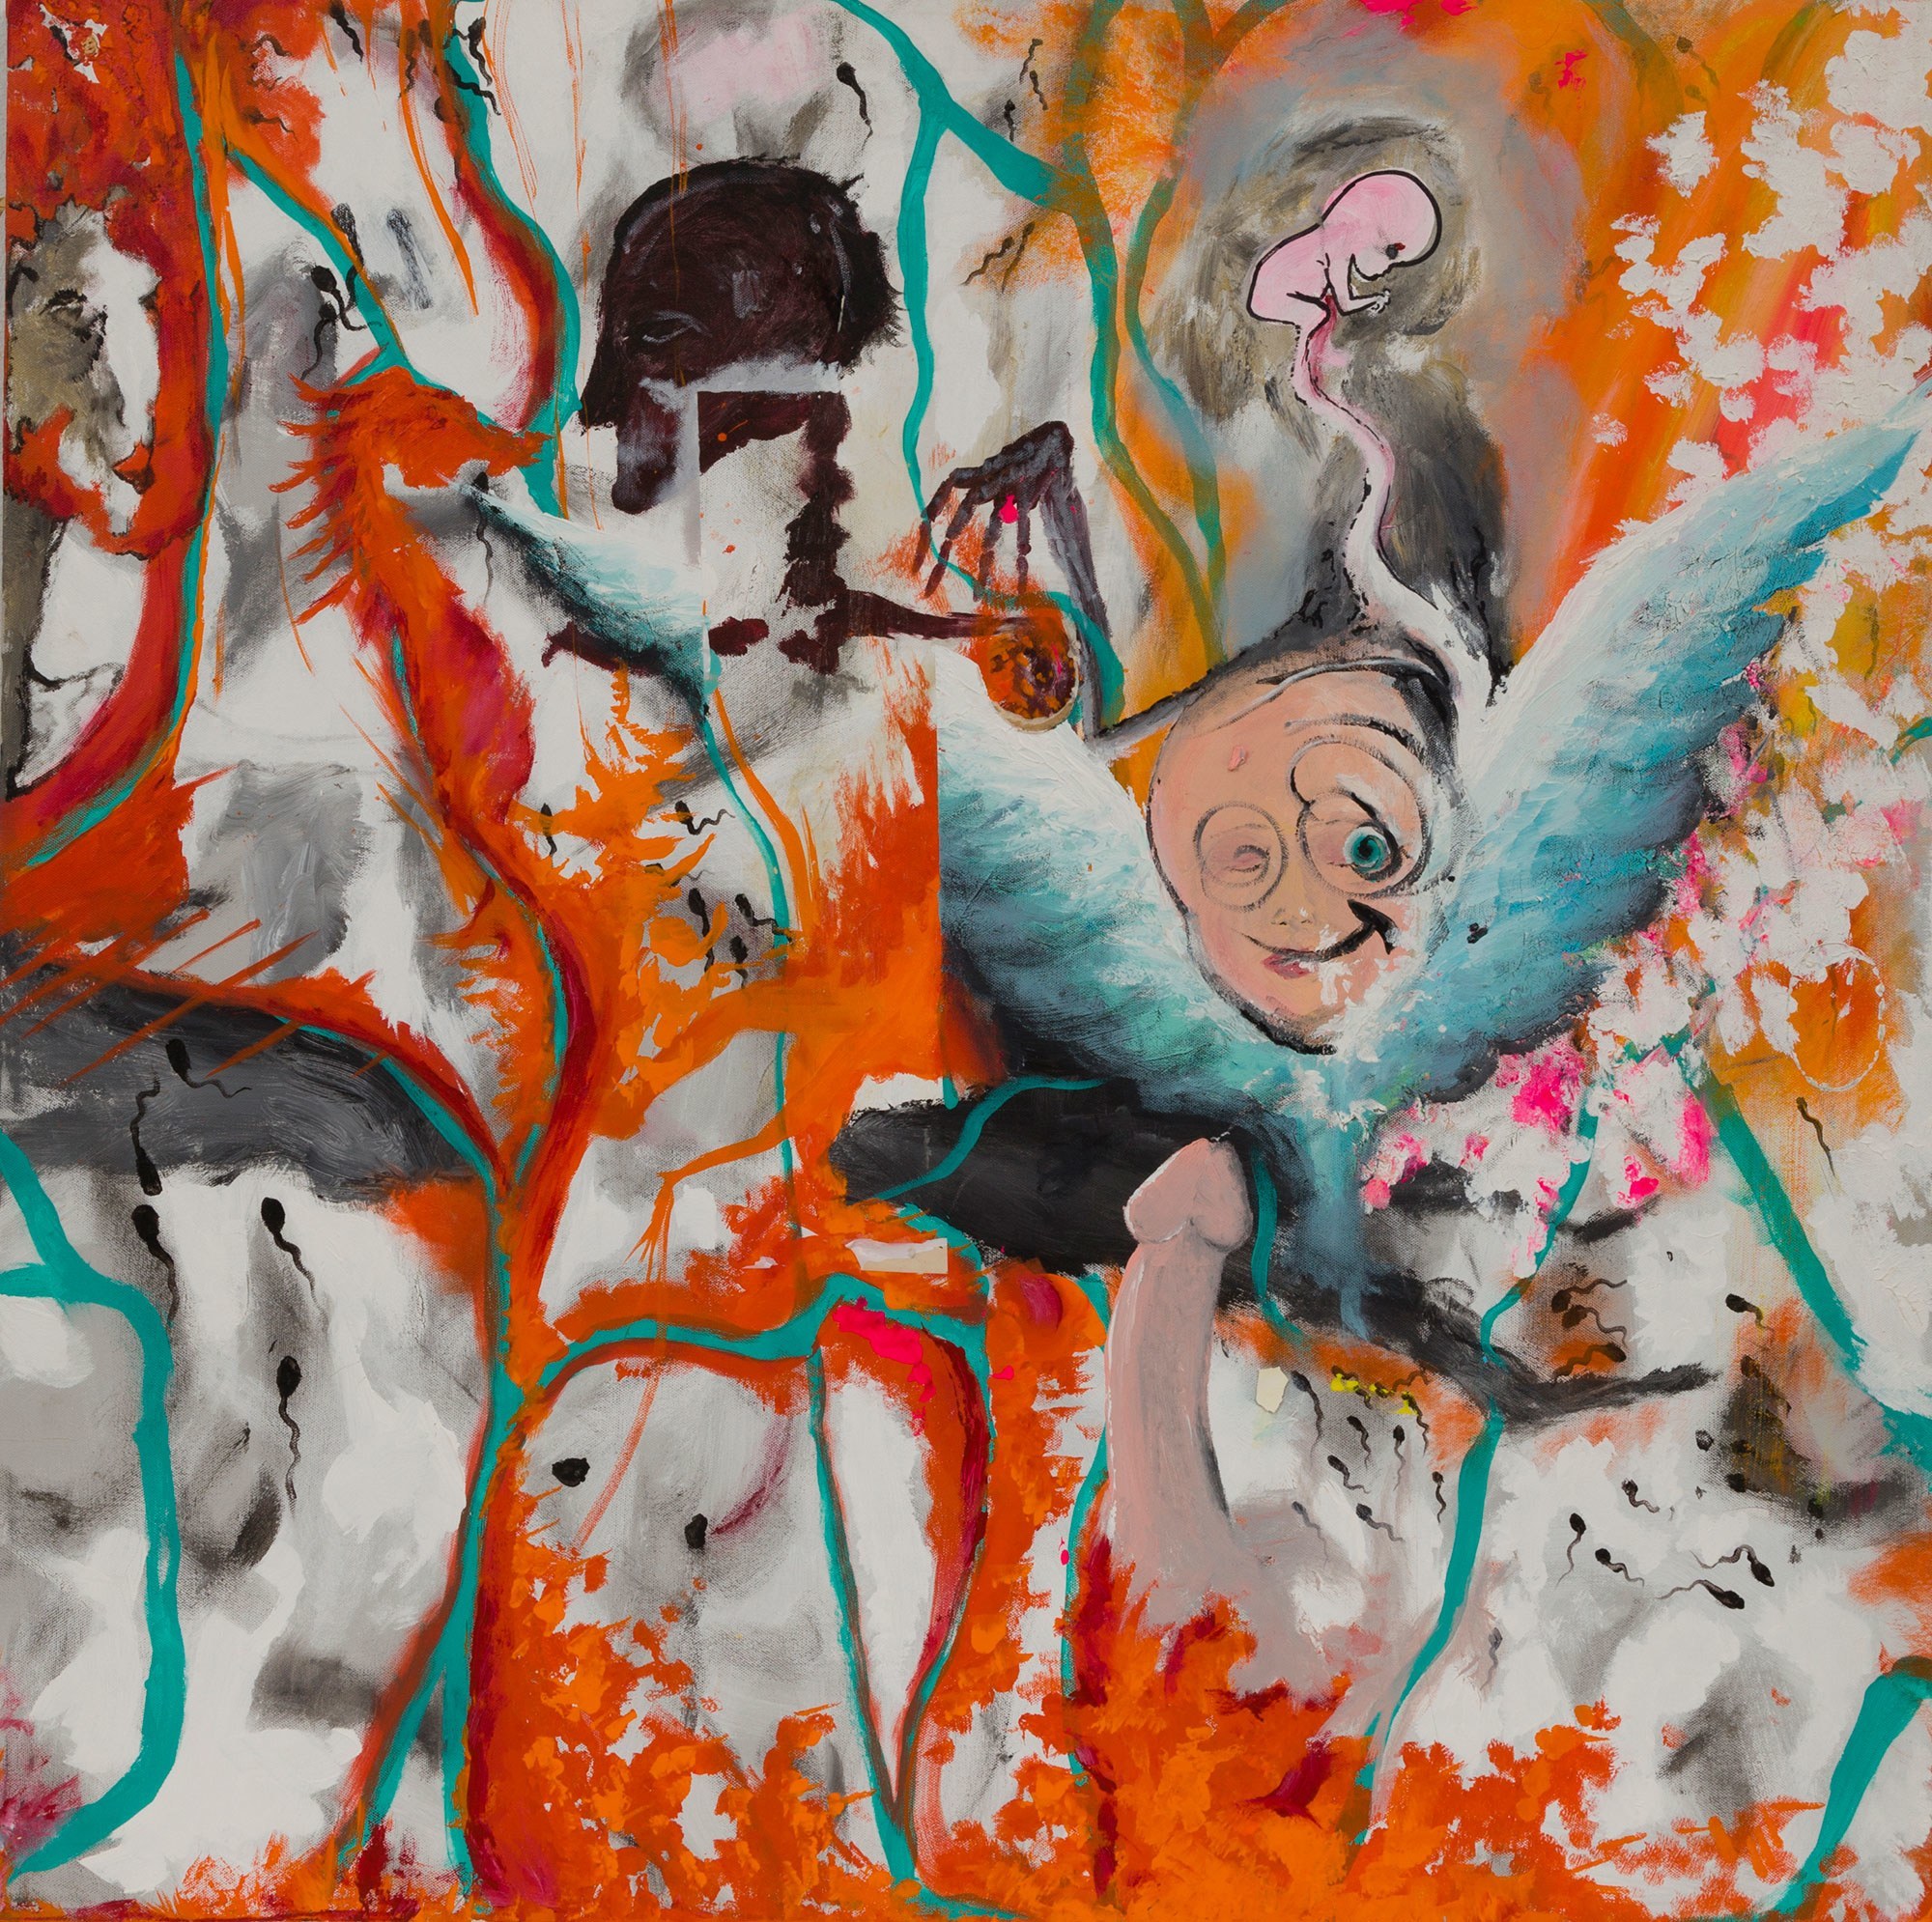 Warning: disturbing subject matter (child abuse). This painting is a complex, partially abstract image with many colours, prominently white, orange, grey, and teal. Different images pop out of the mess of colours, including a seahorse, sperm cells, a very tiny human face in the upper left corner, a skeletal-looking male head in profile with a skeletal claw-like hand, a fetus with umbilical cord, an erect penis, and once again, the child with the strange smile and one open blue eye circled in black. The child has blue wings and the penis is aimed at the child's face, which appears to have semen on it.